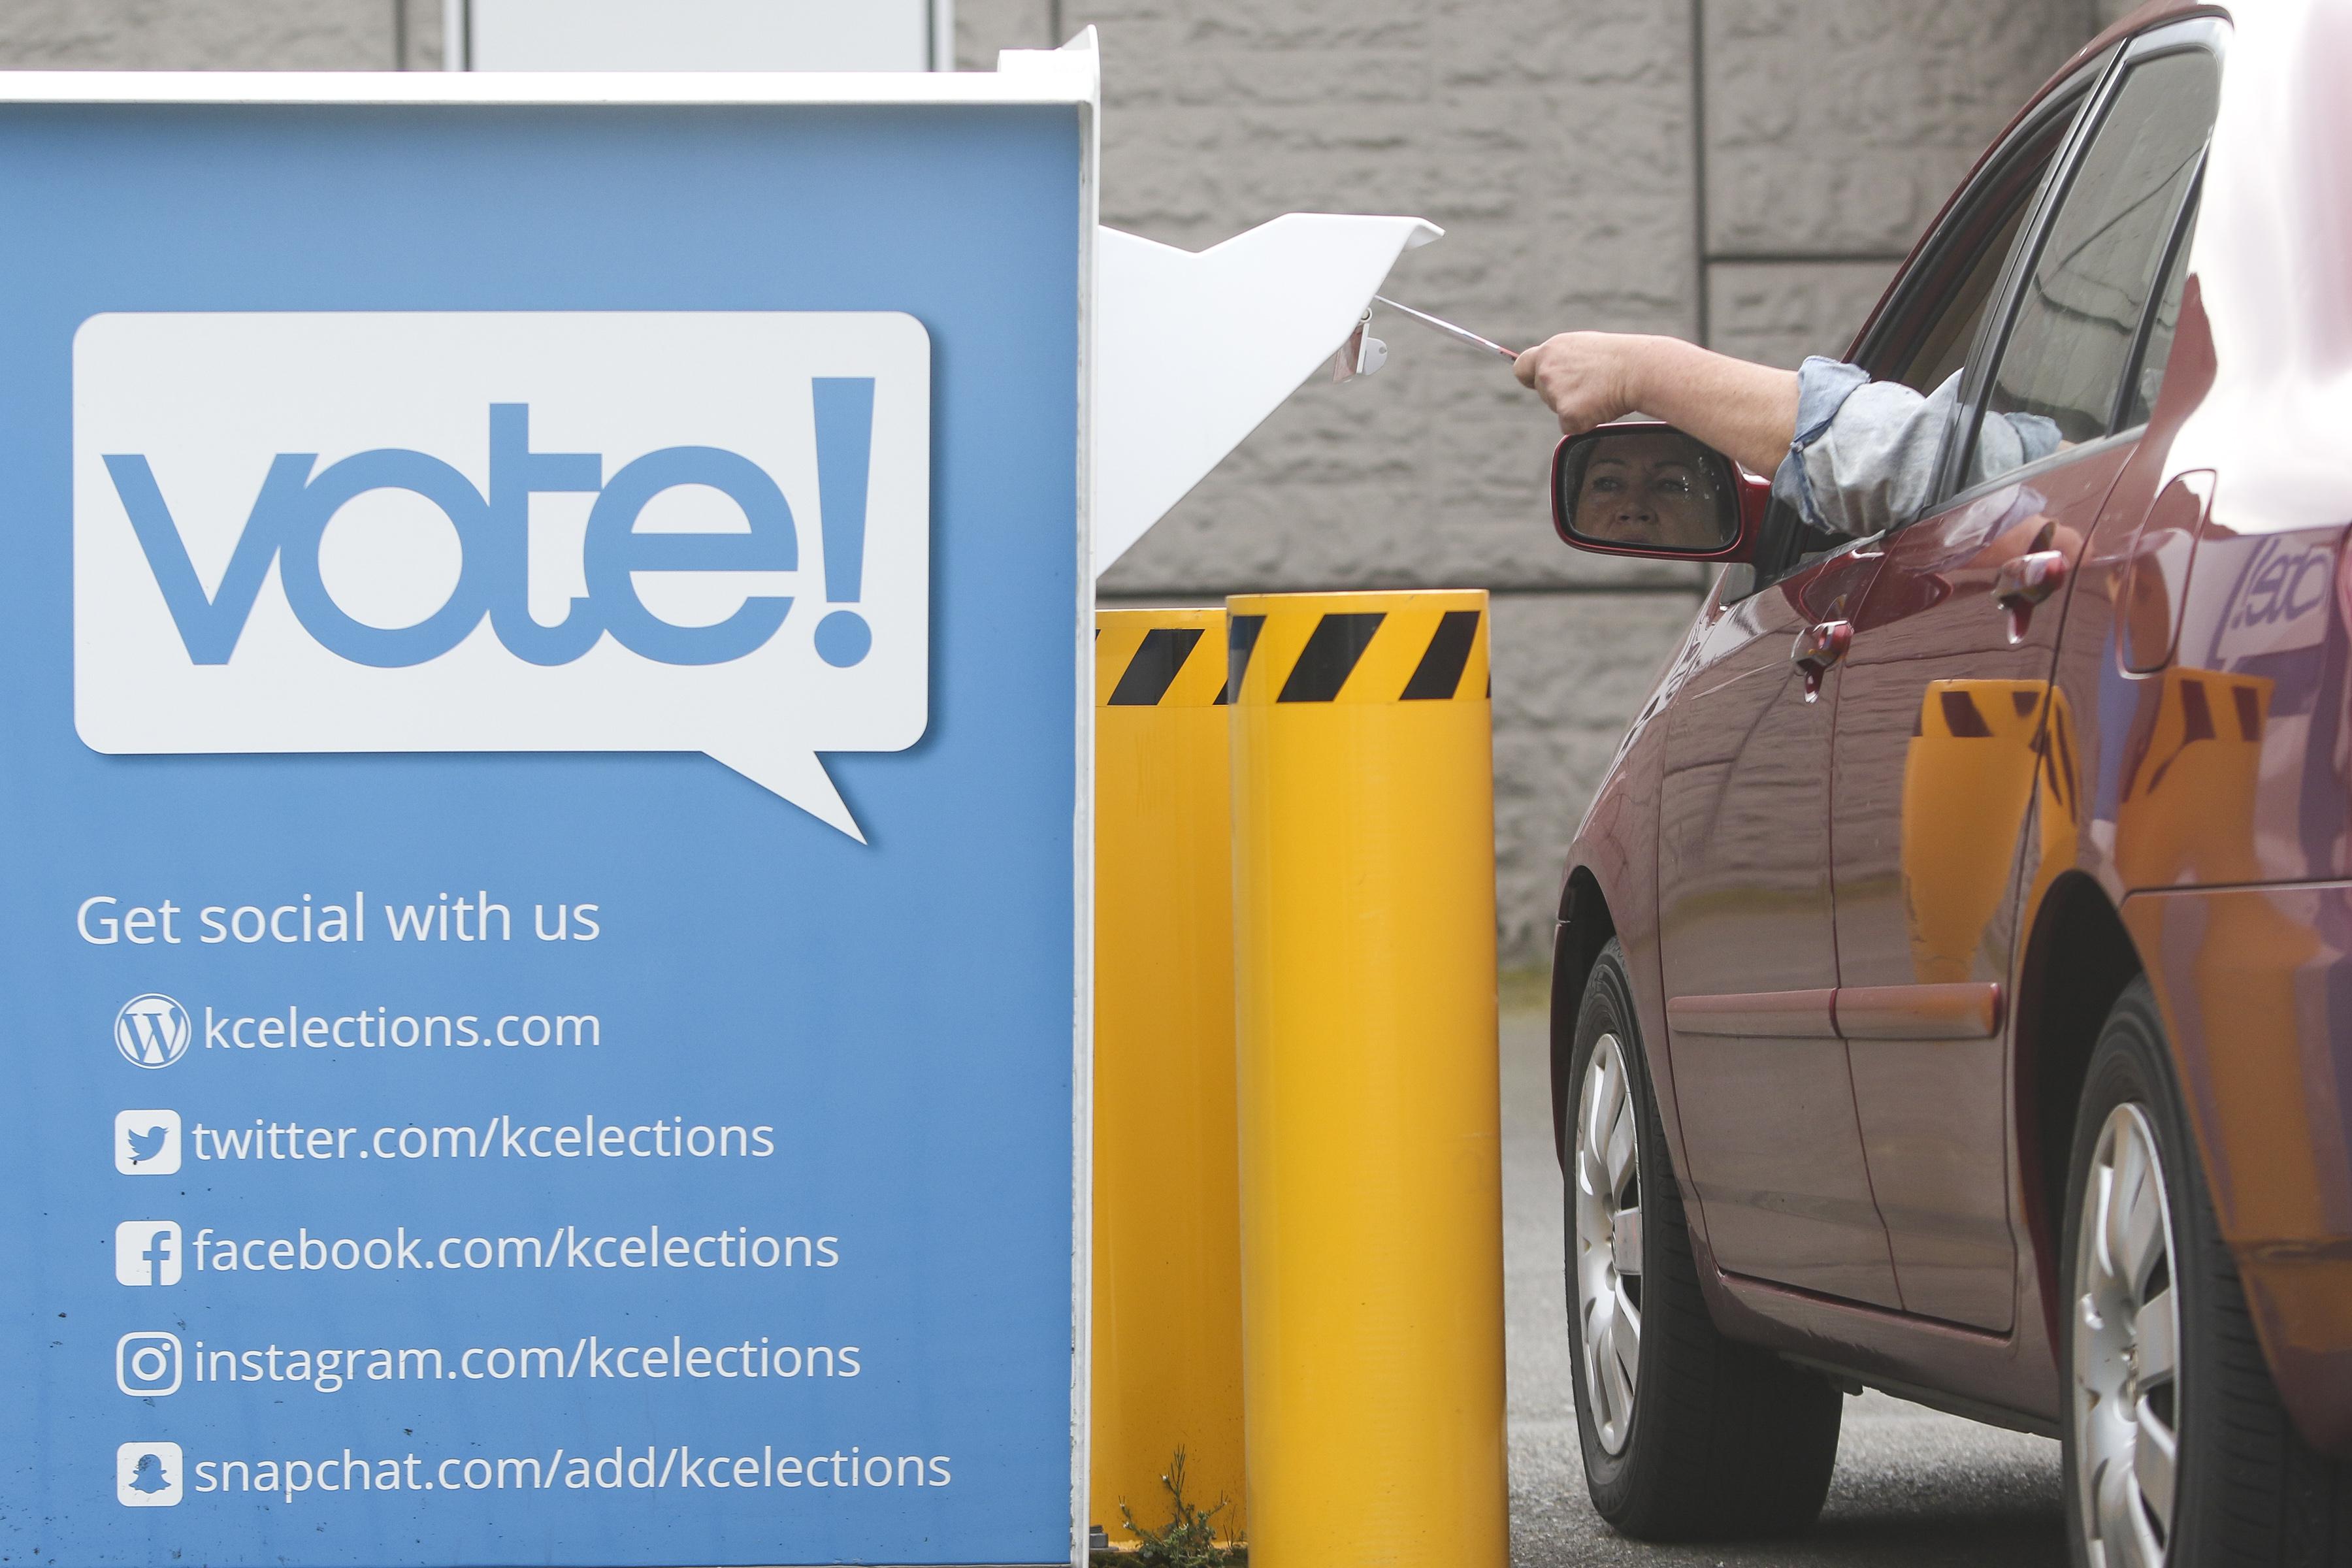 A person in a car puts a ballot in a drop box next to a sign listing local election social media accounts.